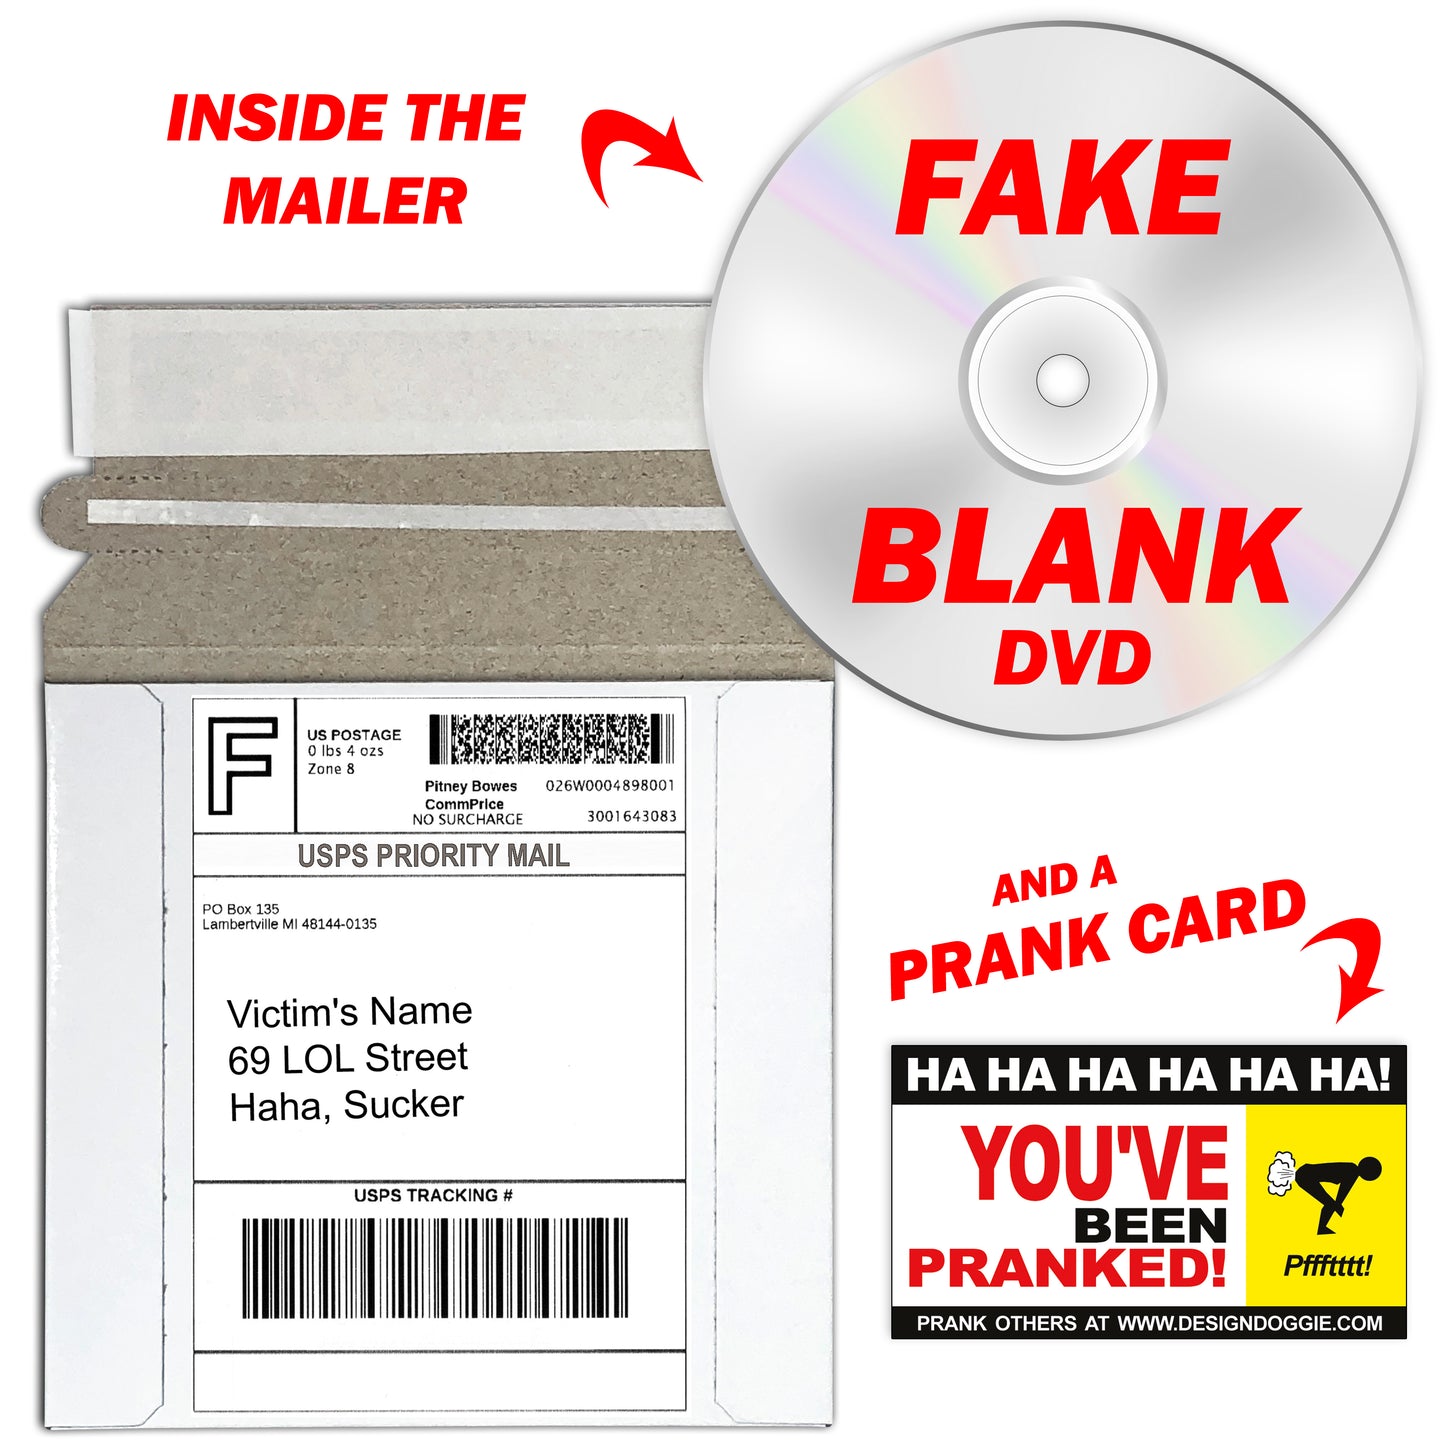 Living with a Micropenis Fake DVD mail prank gets sent directly to your victims 100% anonymously!